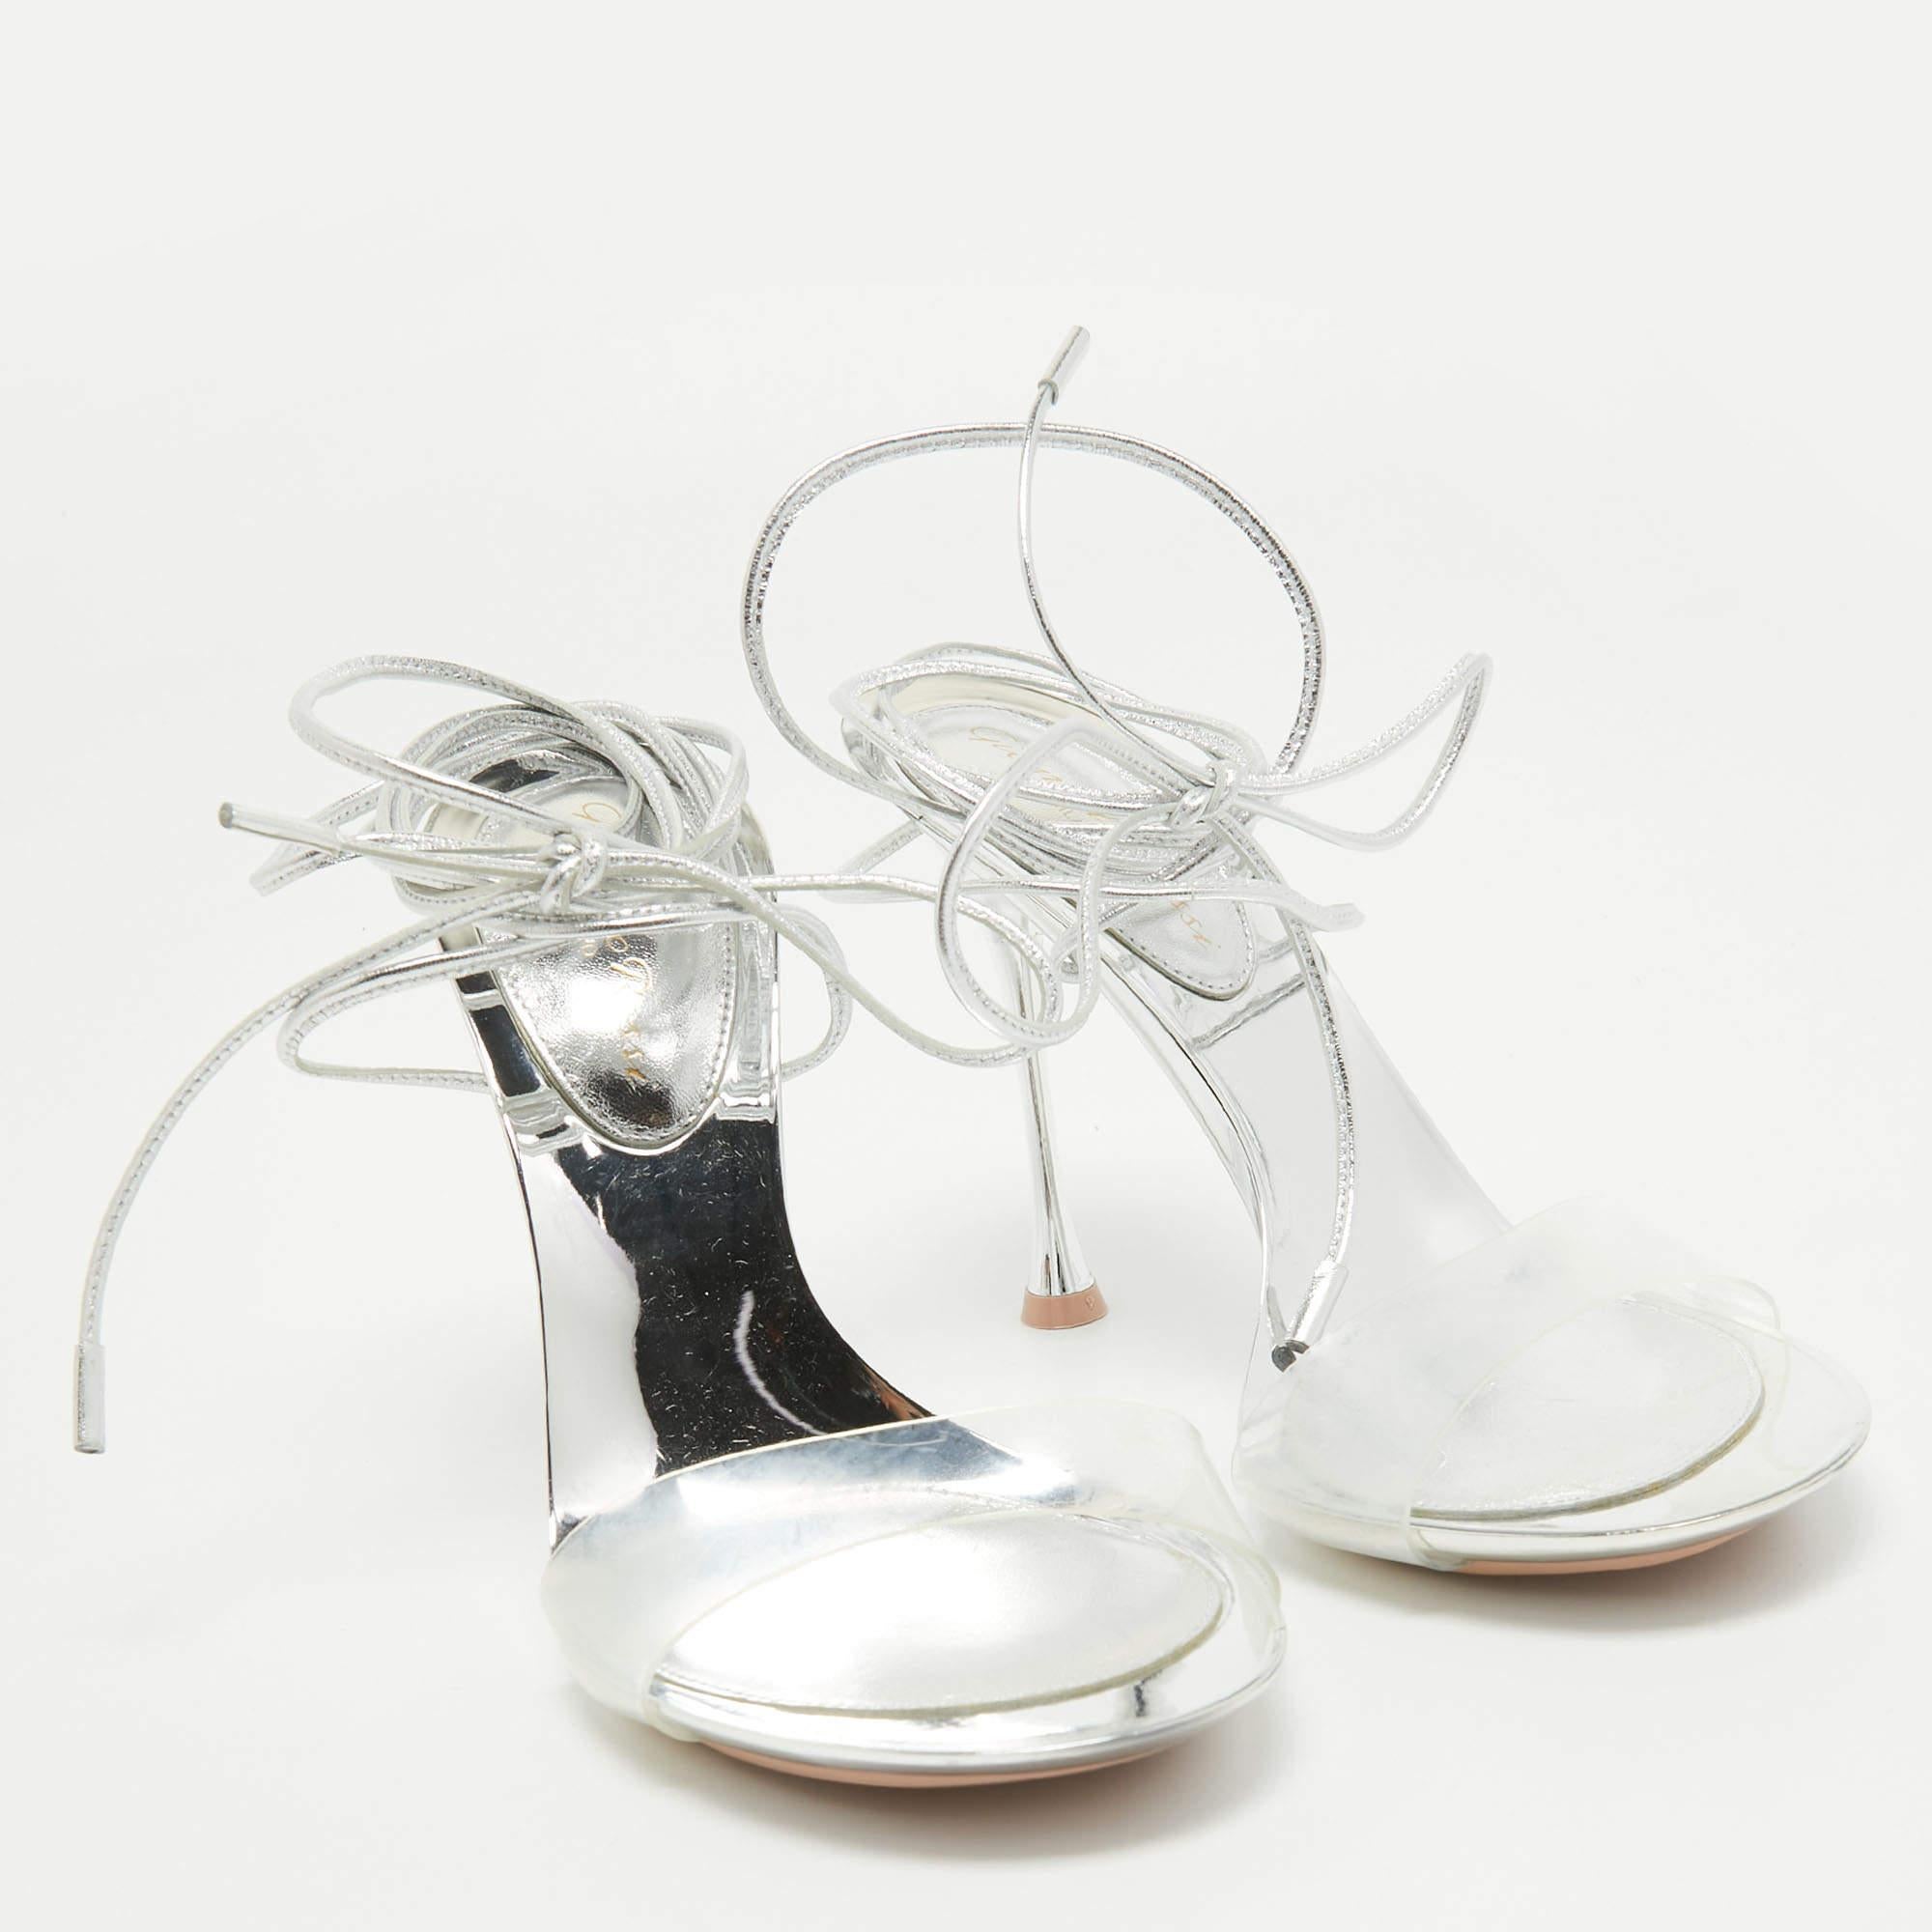 Crafted by Gianvito Rossi, these exquisite sandals seamlessly blend transparent PVC with supple leather. The delicate ankle ties add a touch of femininity, while the sleek design exudes modernity. Perfect for showcasing a pedicure, these sandals